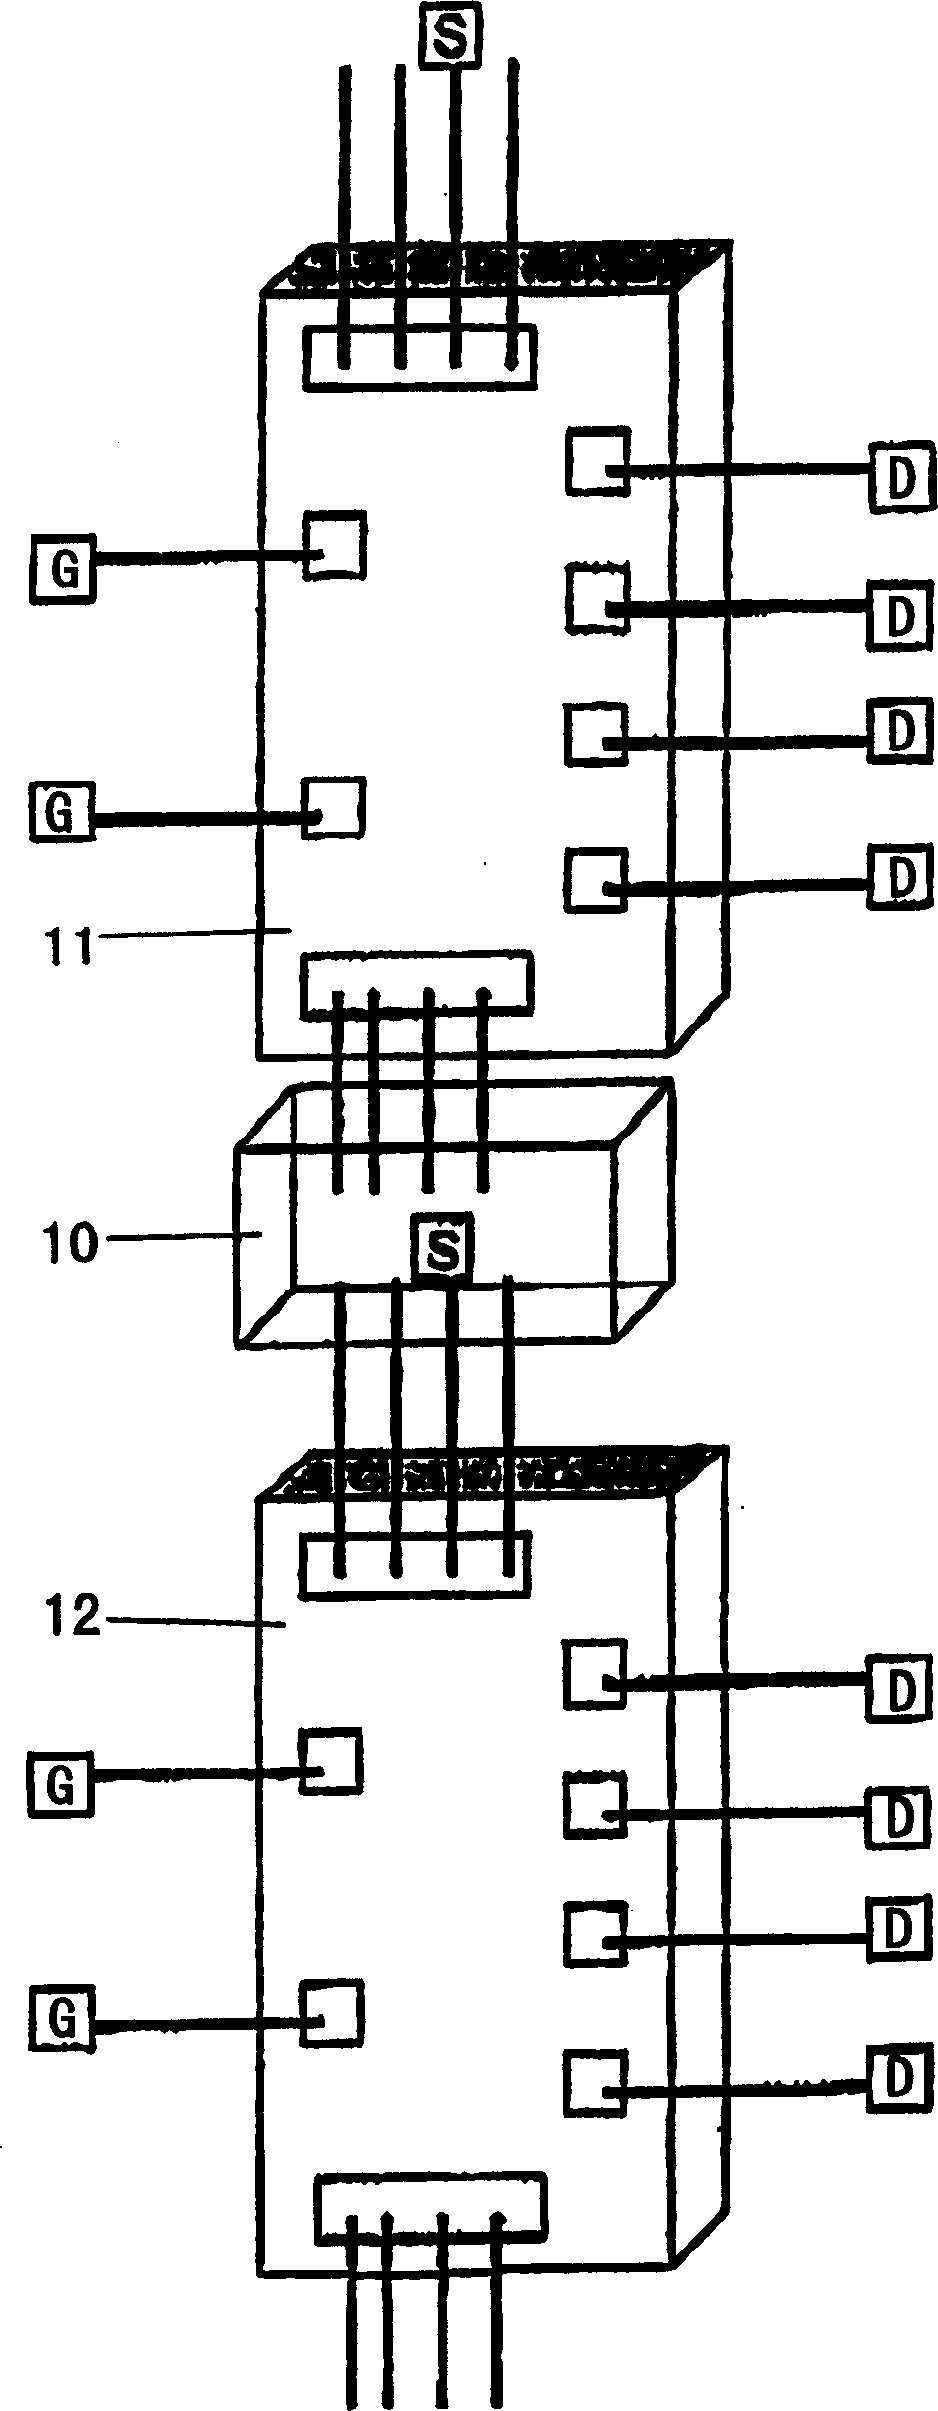 Method and device for inteconnect radio frequency power SiC field effect transistors